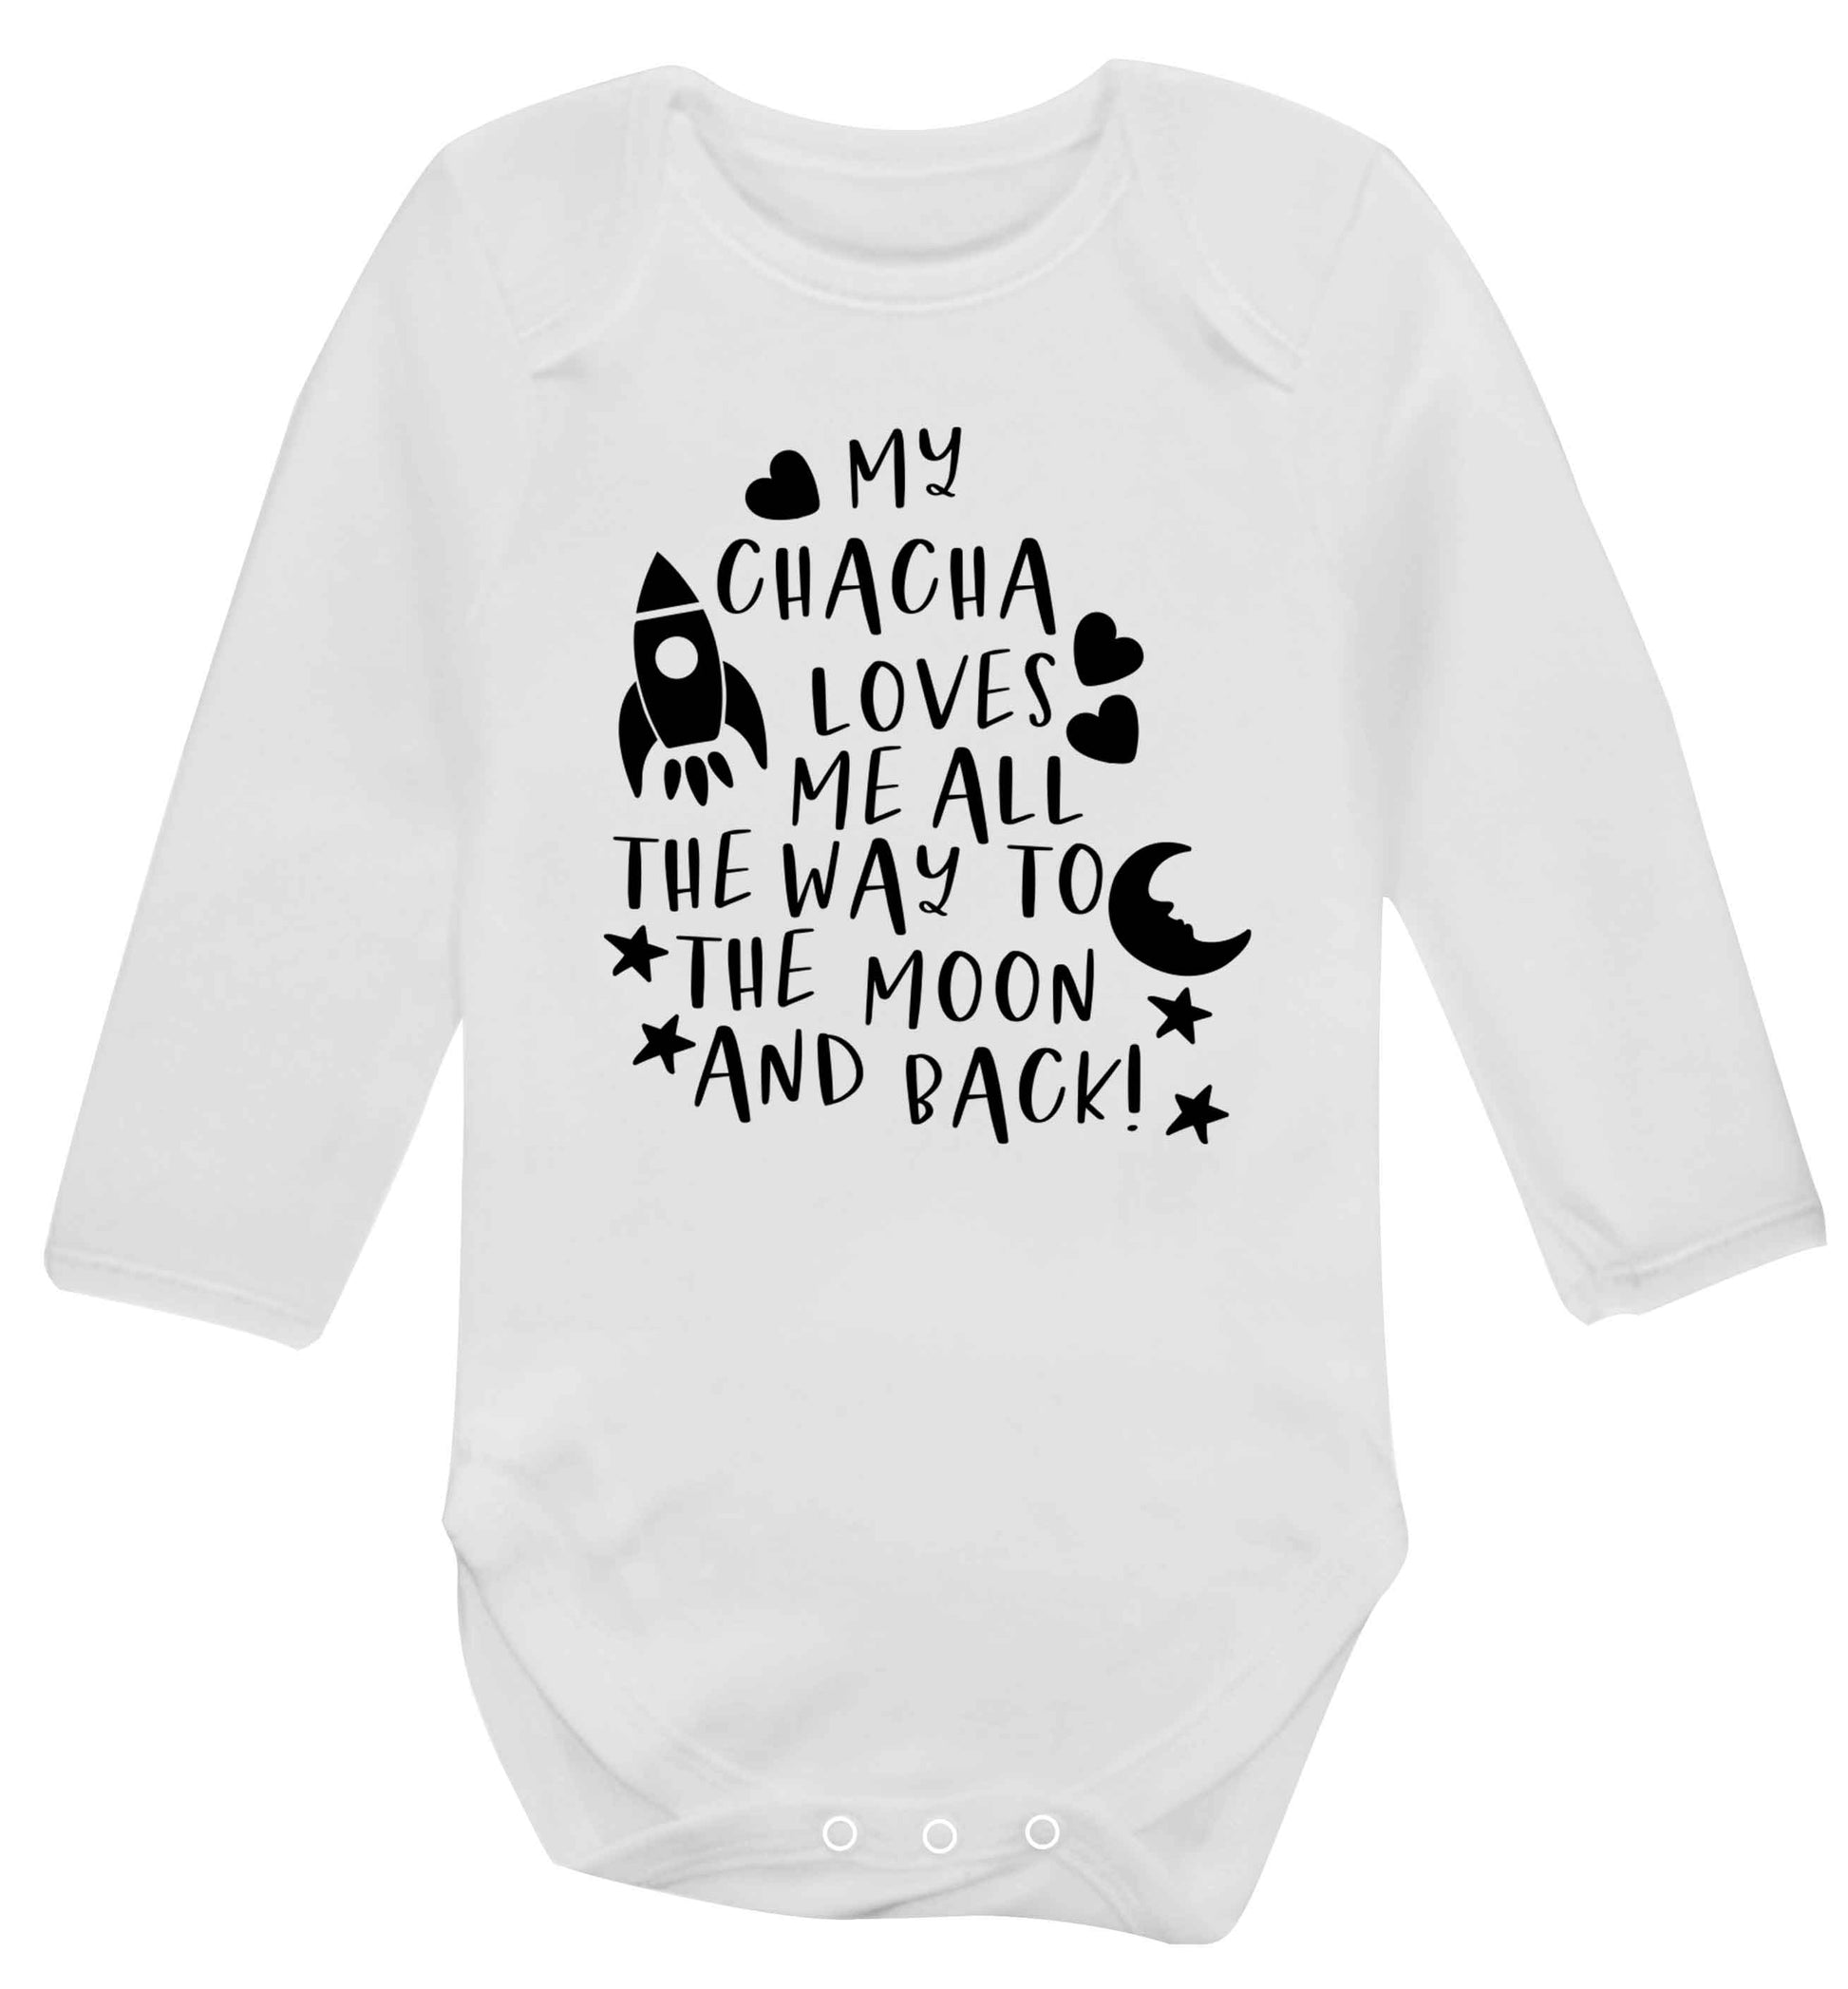 My chacha loves me all the way to the moon and back Baby Vest long sleeved white 6-12 months